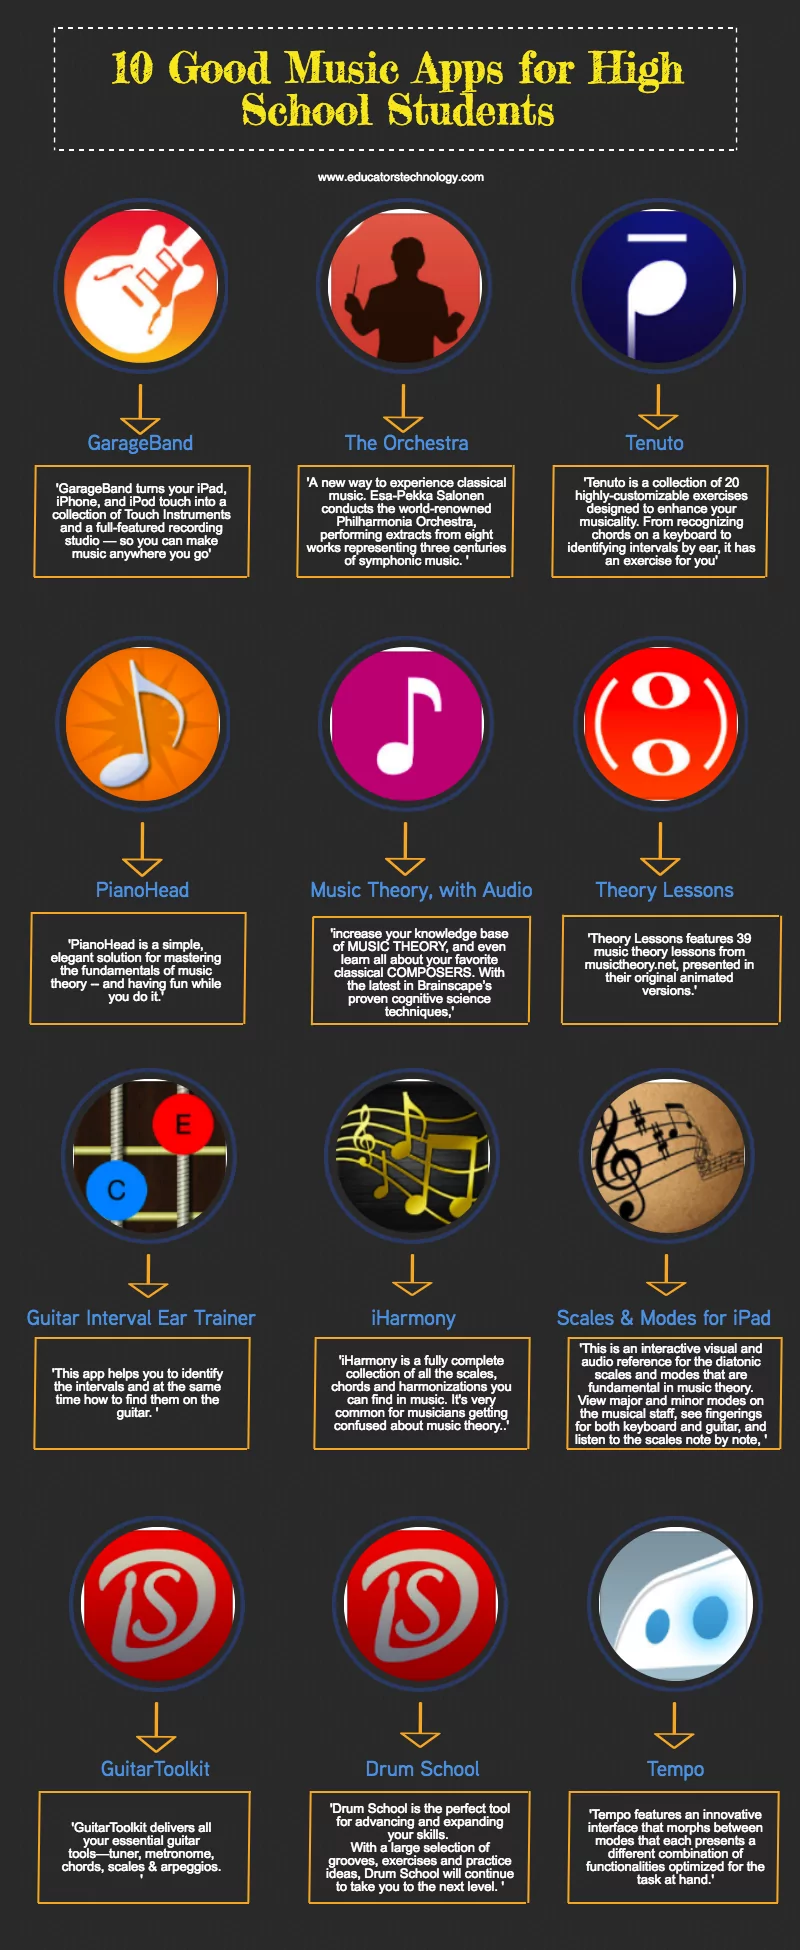 10 Good Music Apps for High School Students